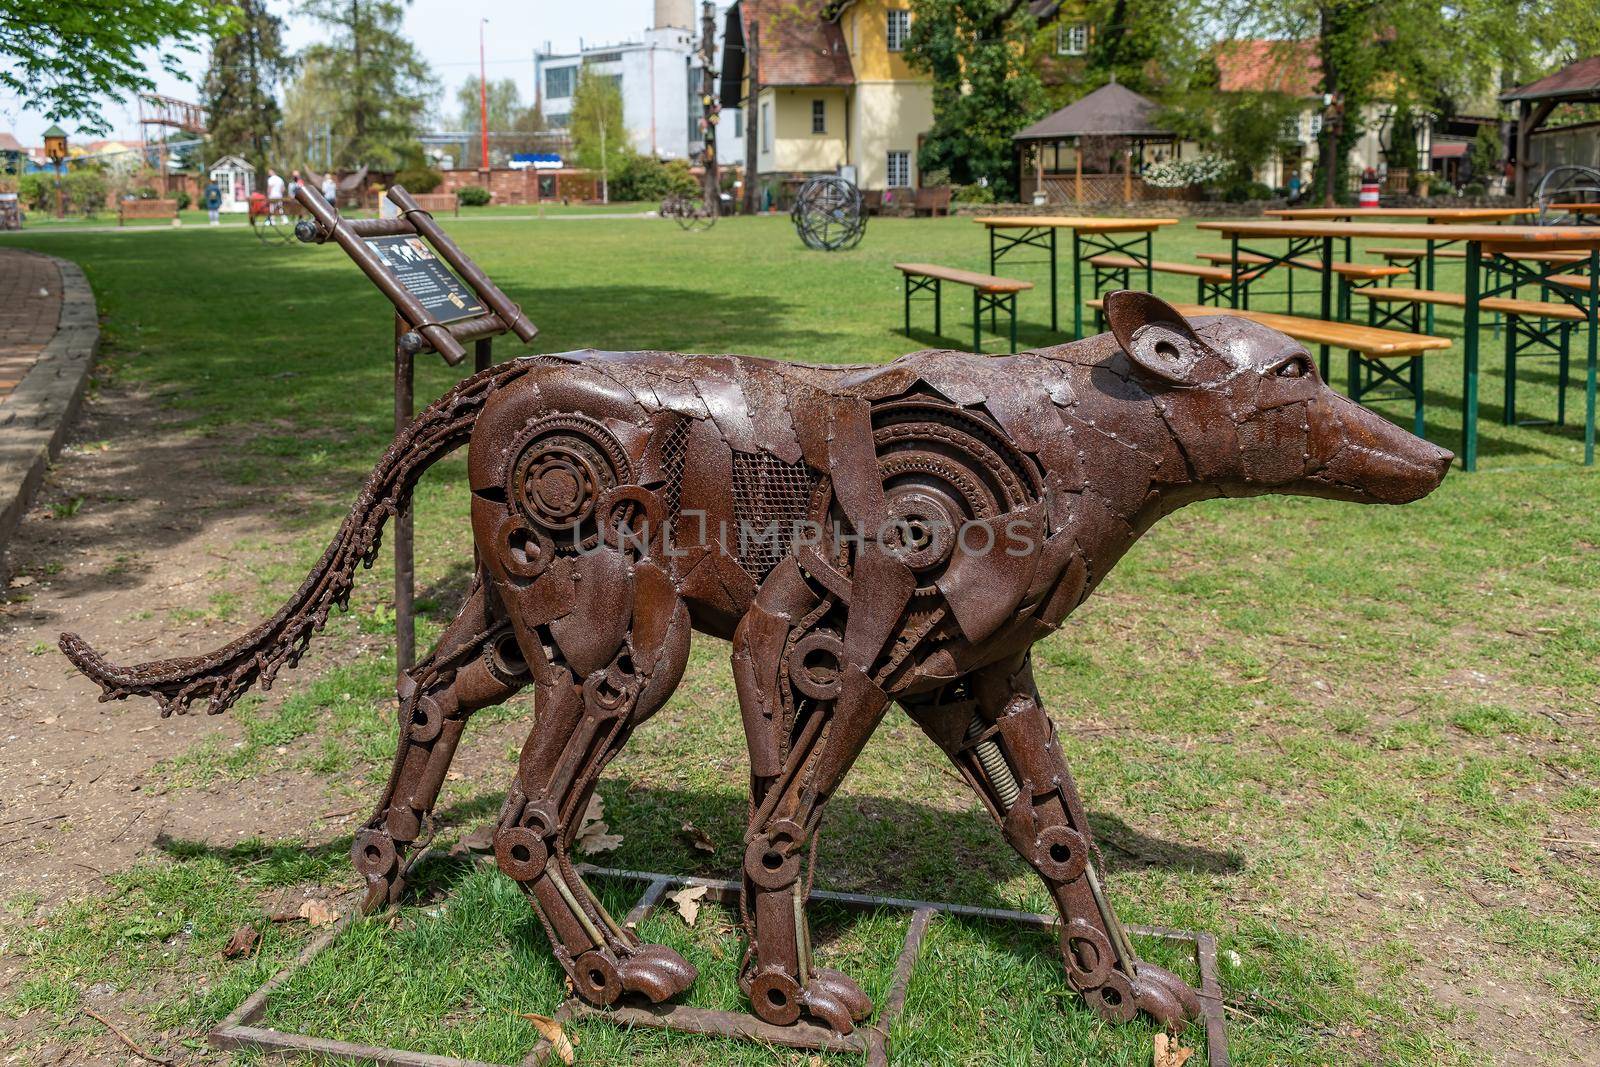 Stare Mesto, Czech Republic 29 April 2022 KOVOZOO original exposition with animals and technology from recycled old scrap. Statue of a wolf made of metal waste